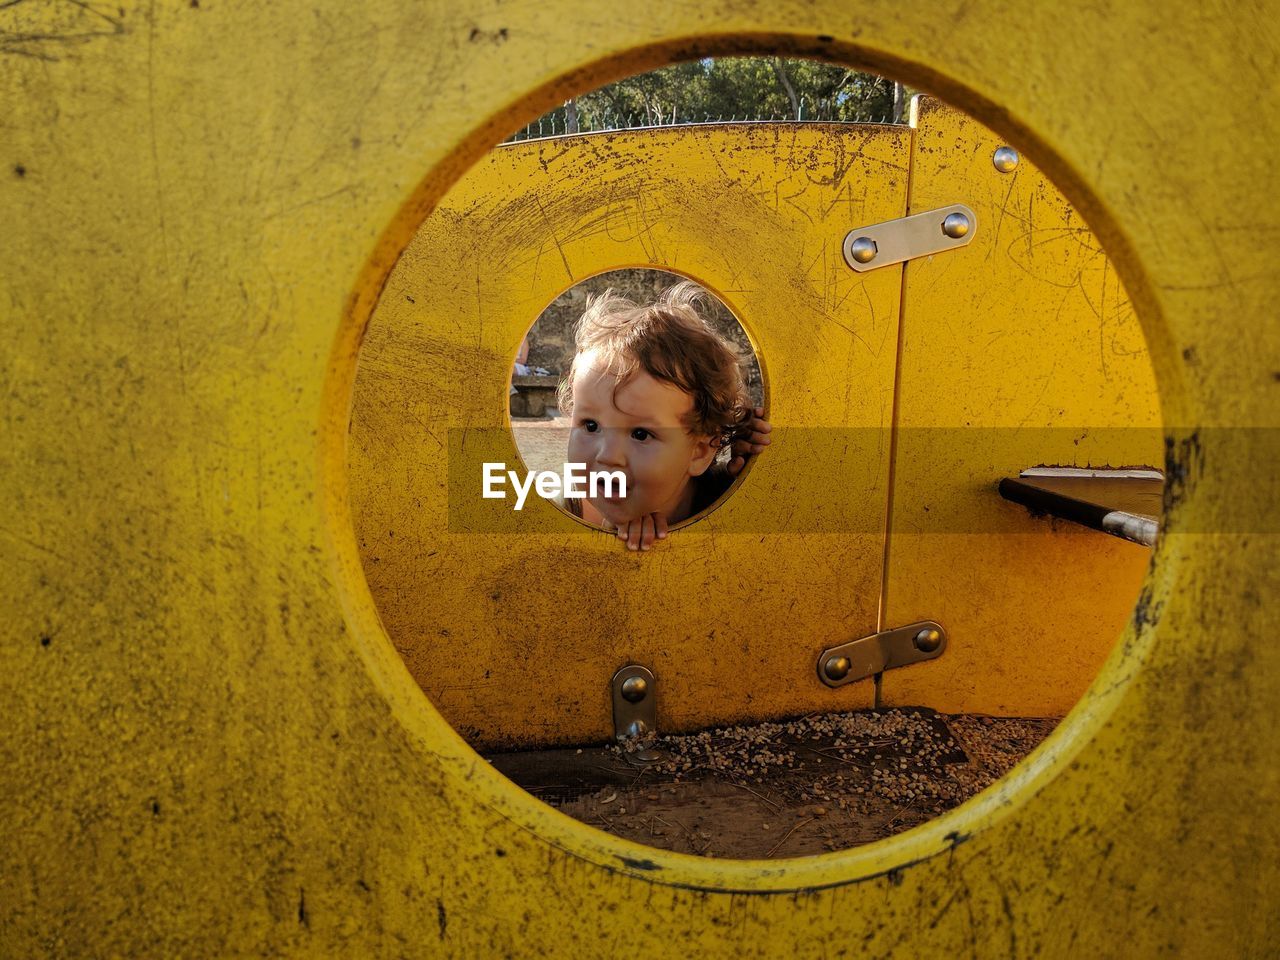 Cute baby boy looking through hole of play equipment